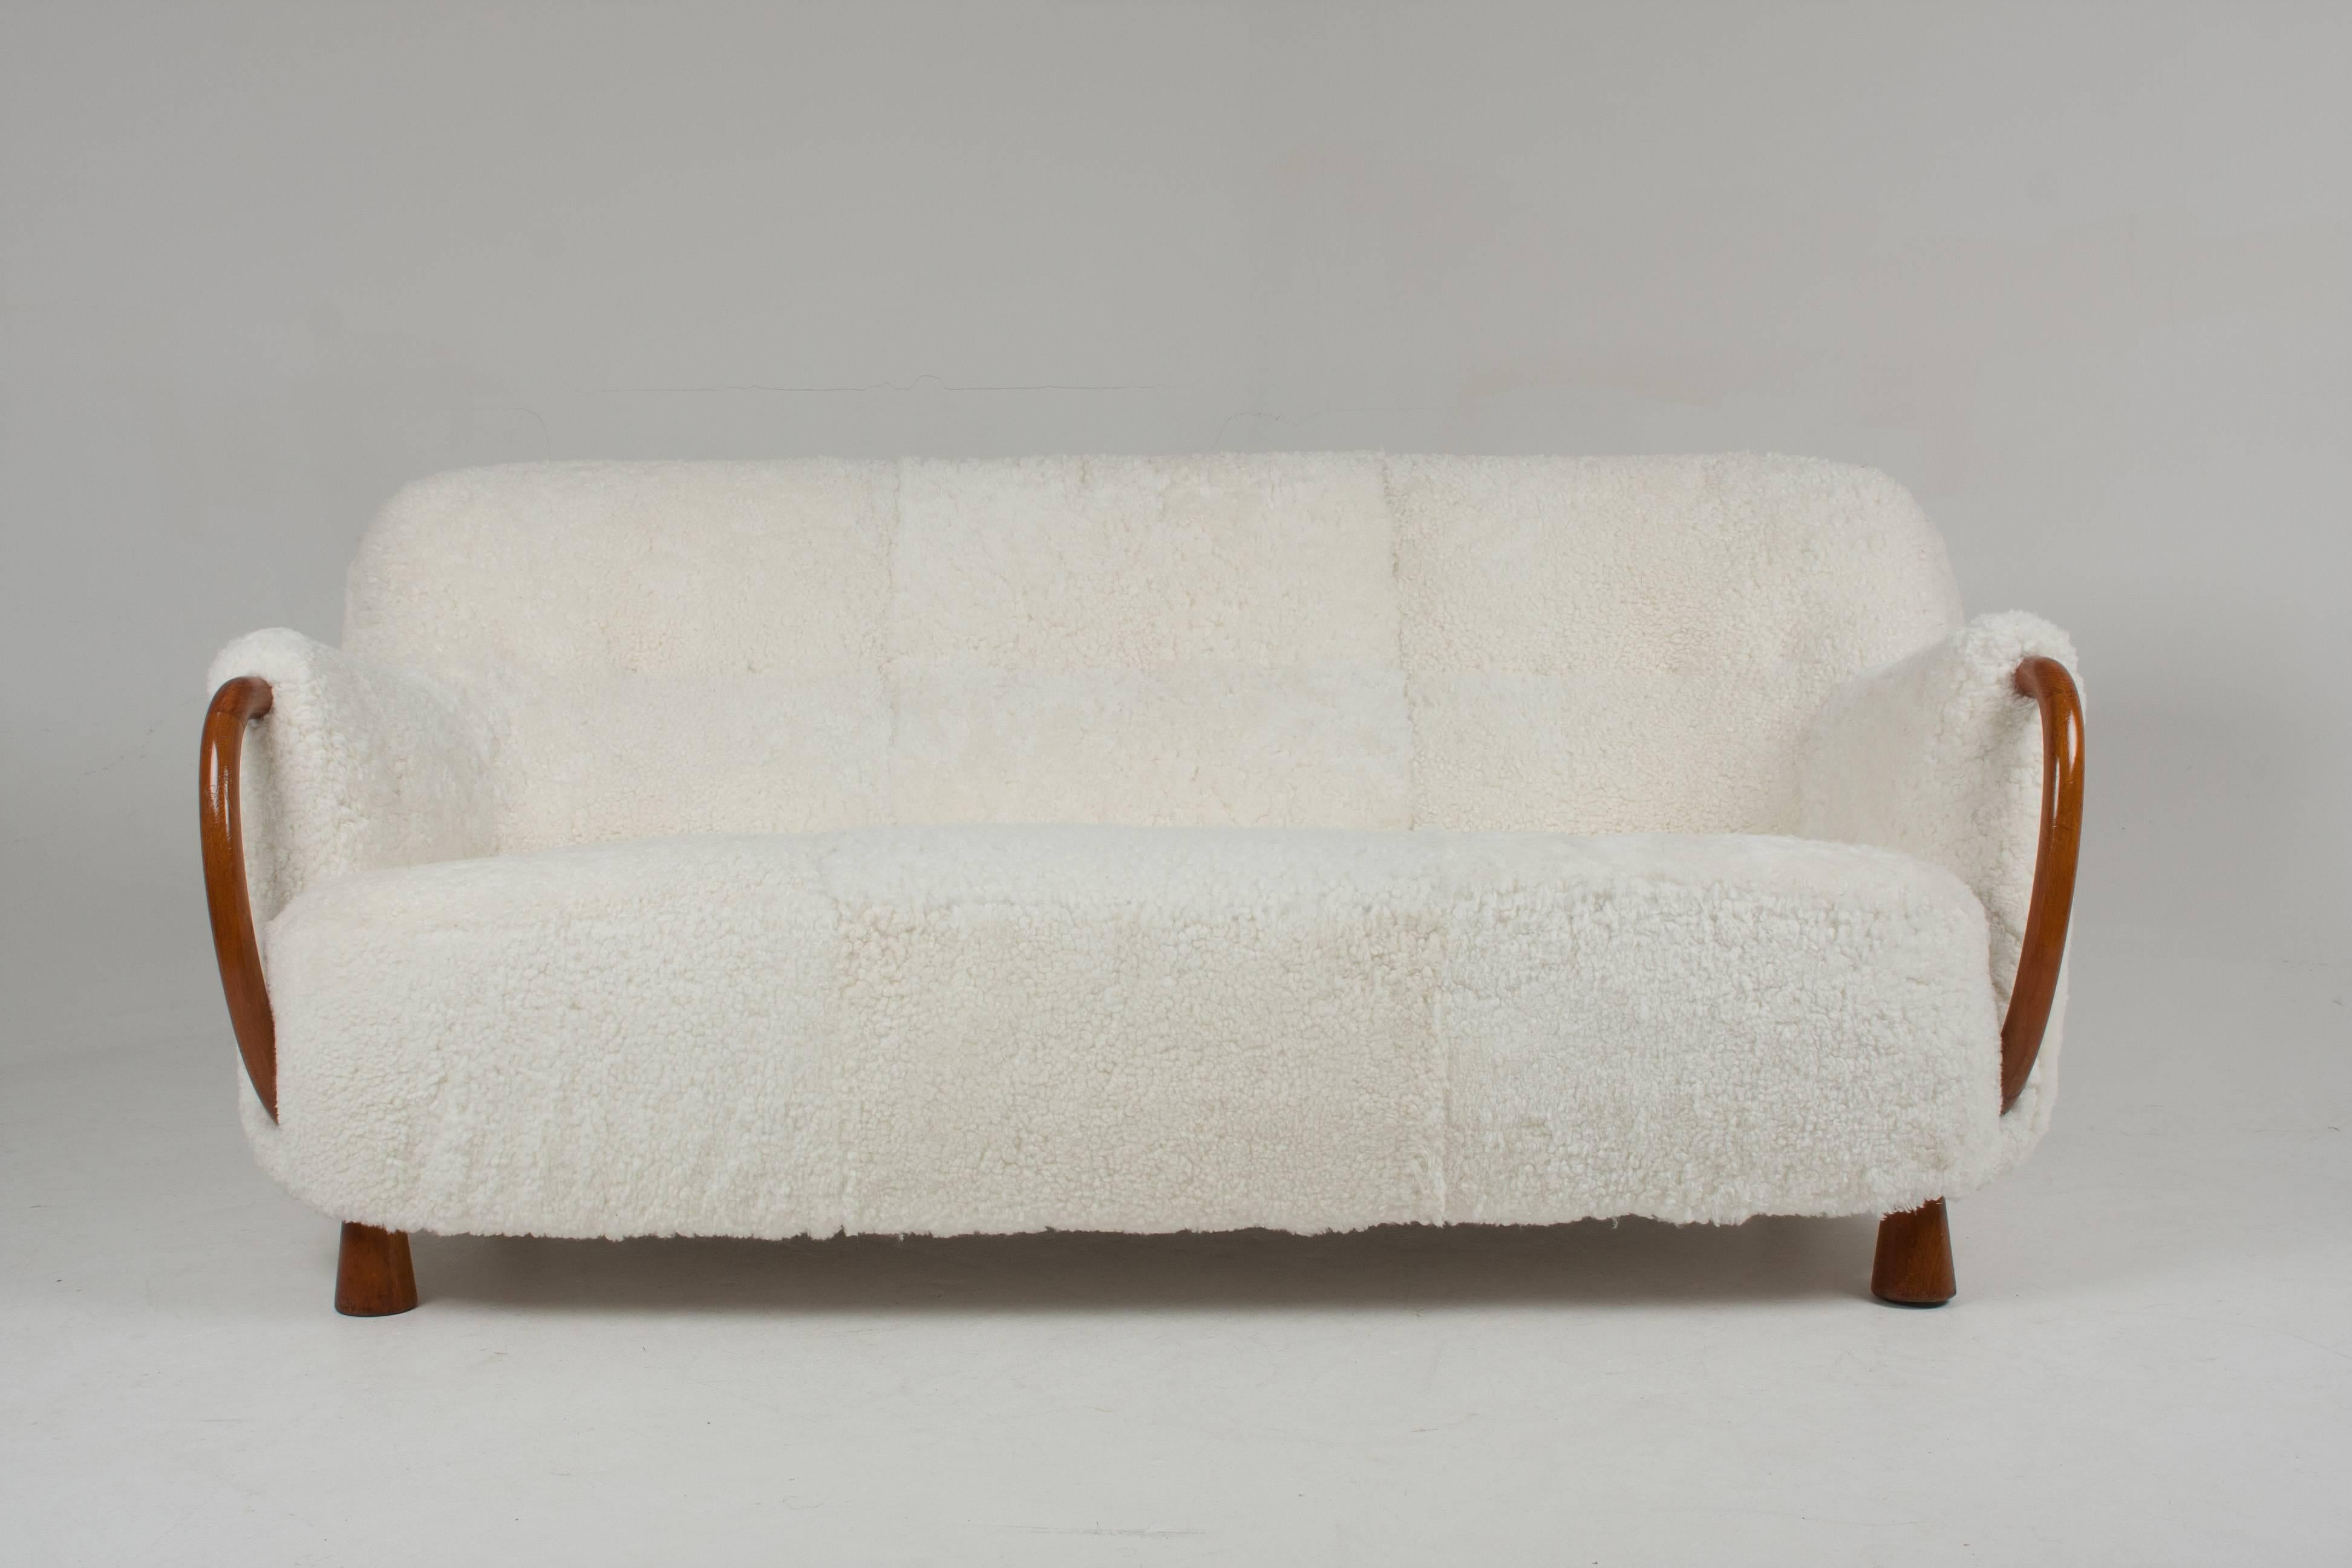 You are viewing a stunning Vintage three-seat Sofa with Sheepskin by Viggo Boesen for Slagelse Mobelvaerk

The sofa has been professionally re-upholstered in white sheepskin.

Oak arms and feet.

Designed by Viggo Boesen.

Similar depicted